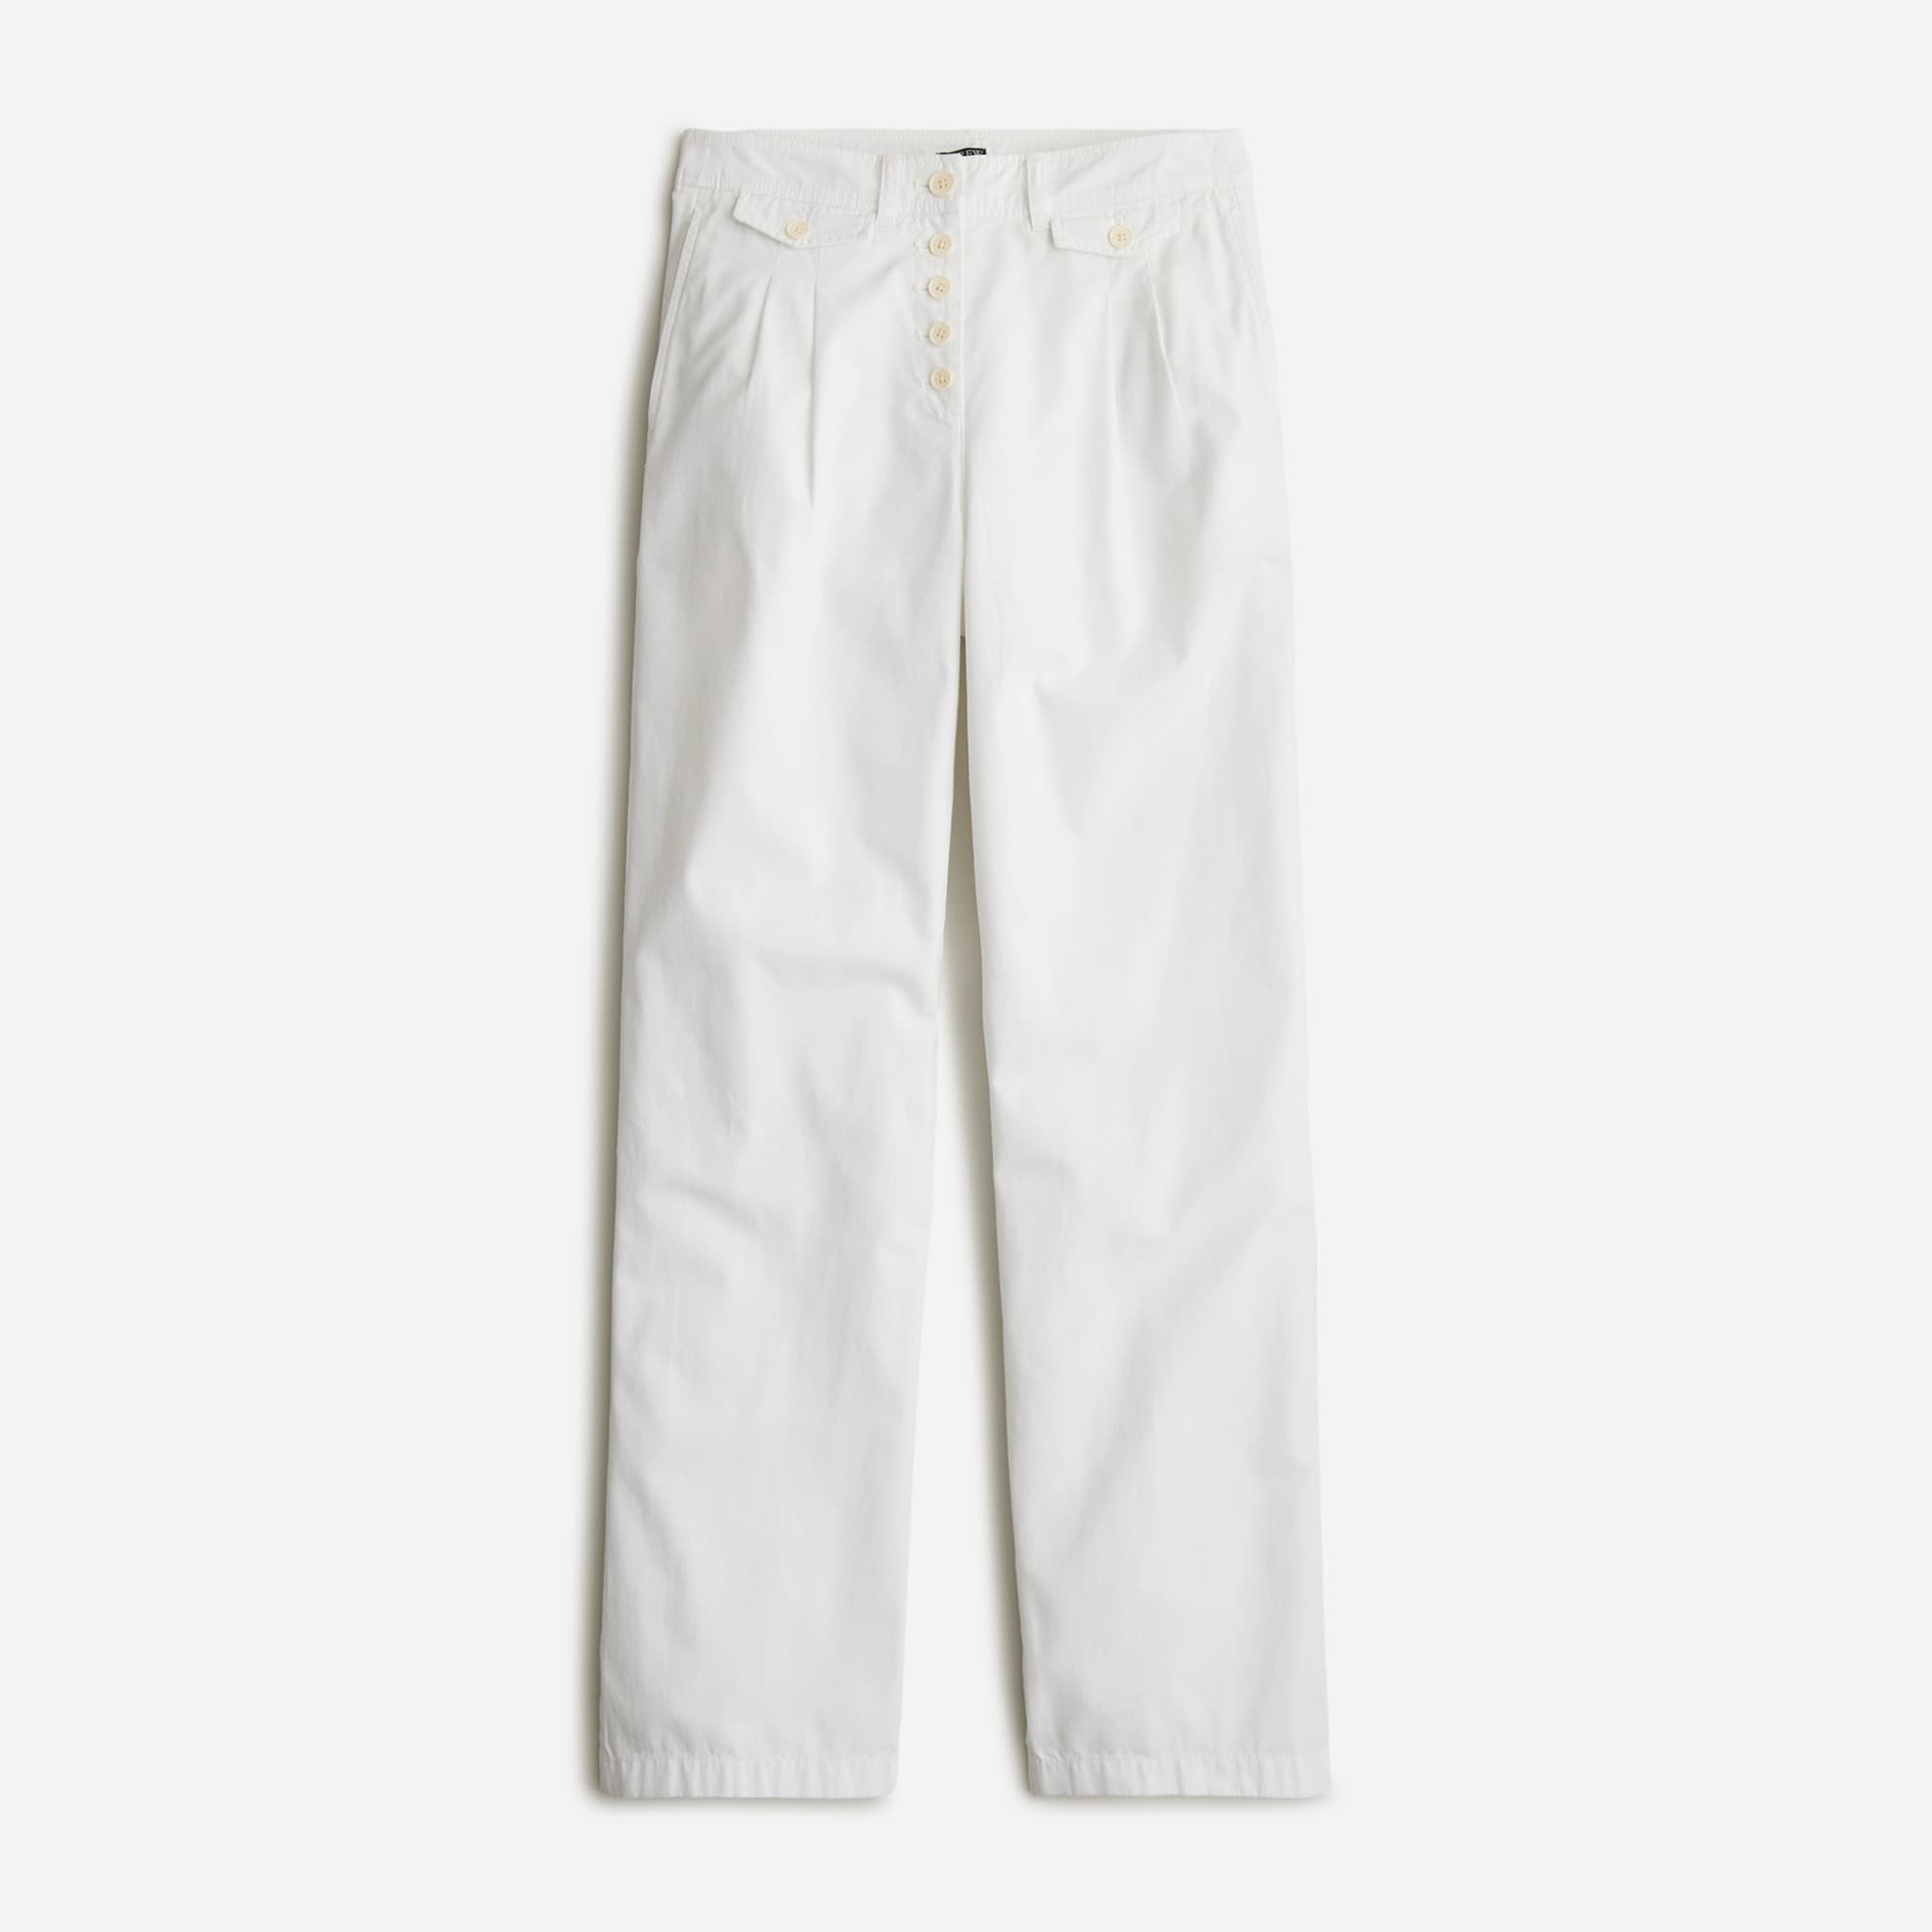  Pleated button-front pant in chino